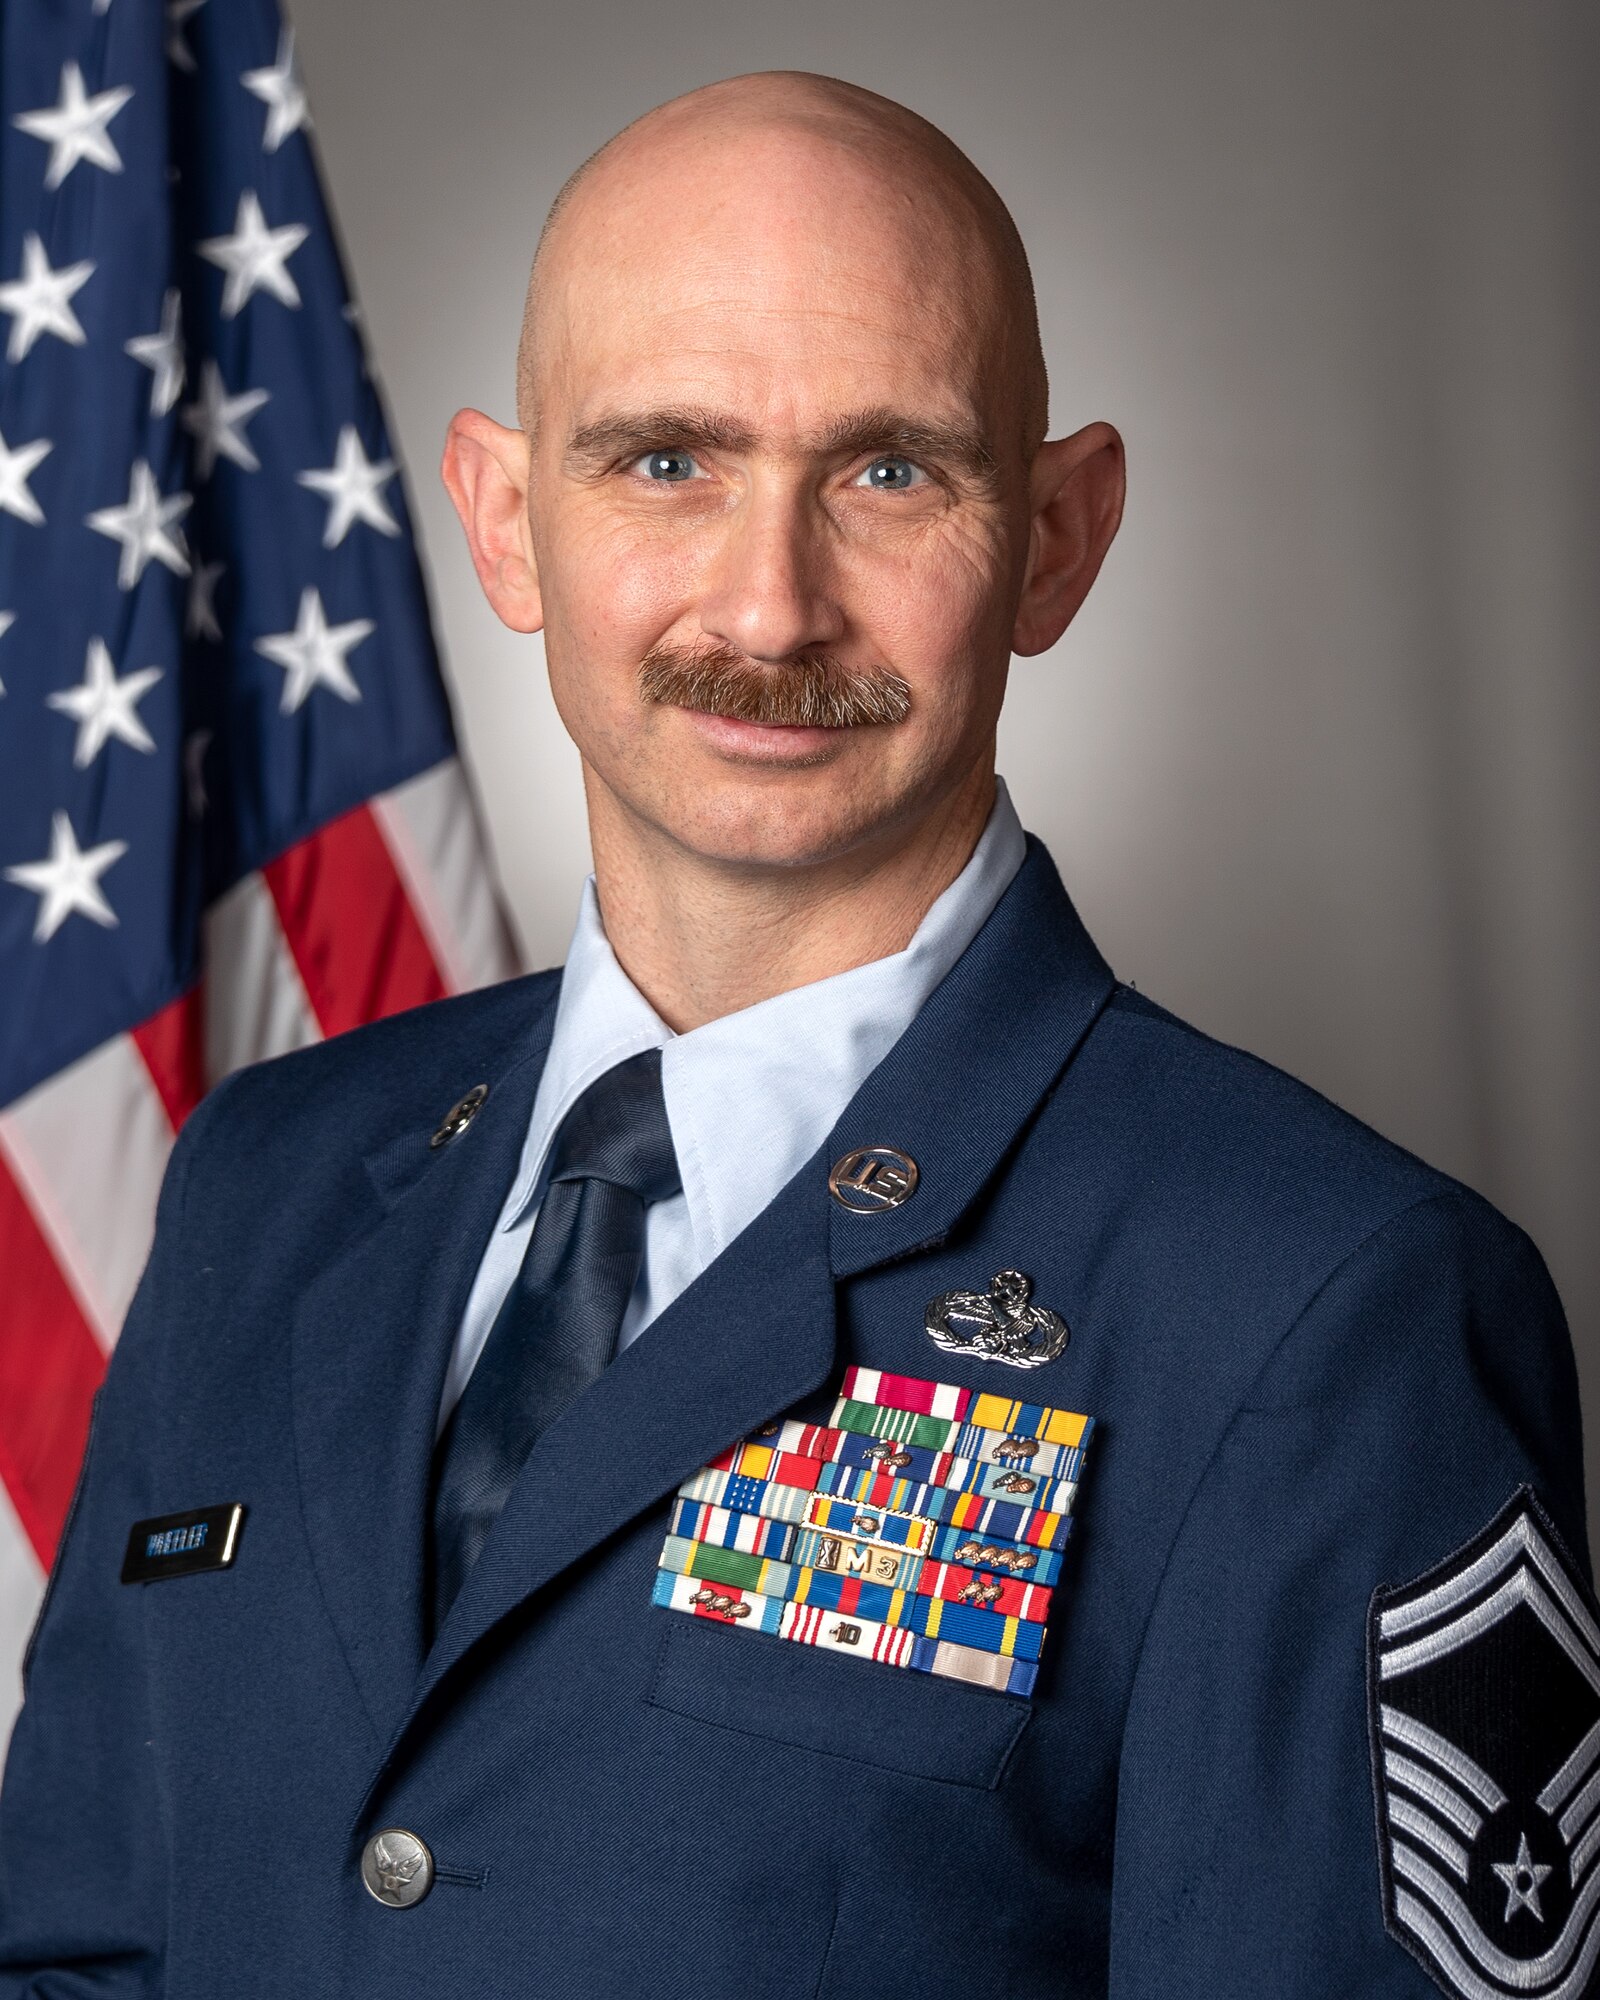 U.S. Air Force Senior Master Sgt. Bradley Wheeler, a human resource advisor with the 182nd Airlift Wing, Illinois Air National Guard, poses for a portrait in Peoria, Illinois, April 2, 2023.